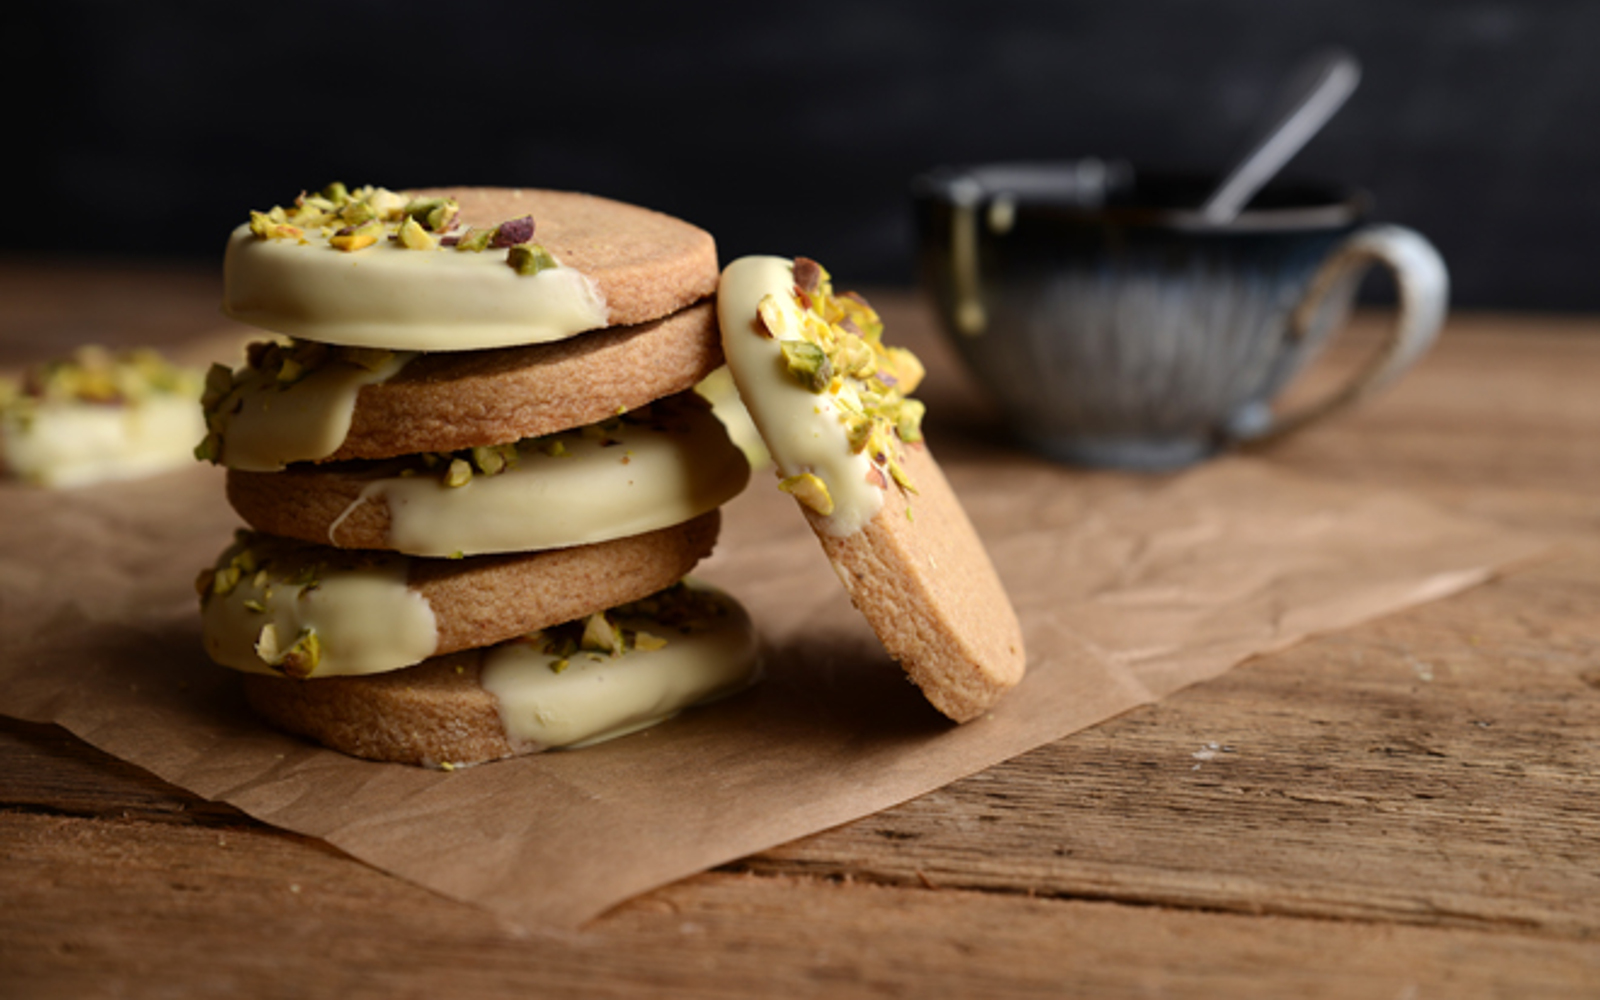 Spiced Shortbread Dipped in White Chocolate and Pistachios